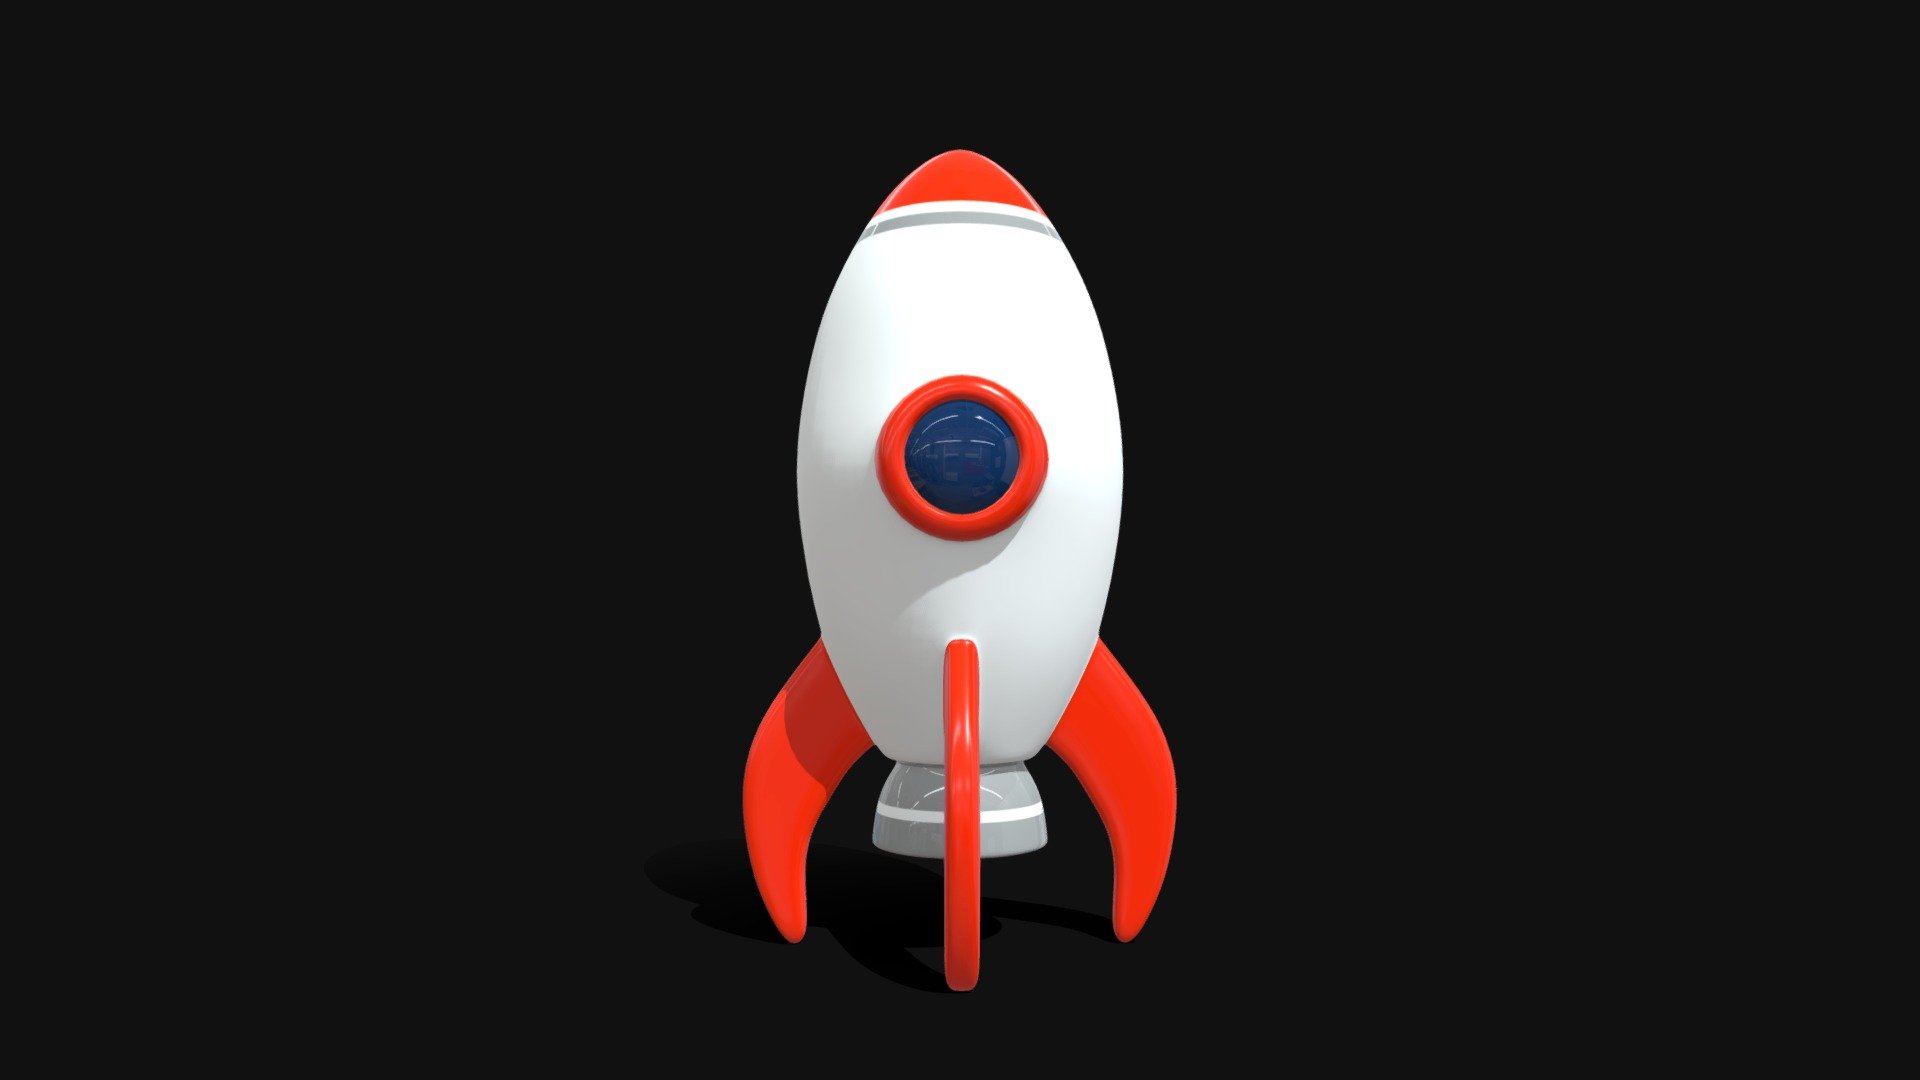 Space Rocket Low Poly Icon Style.

Only quad polygons with correct topology, supports multiple subdivisions.

Archive file contains: .c4d, .fbx, .obj, .mtl, .stl + textures.

! For better results please use subdivision surface without UV smoothing ! - Space Rocket 1 - 3D model by Andrey Sannikov (@ritordp) 3d model